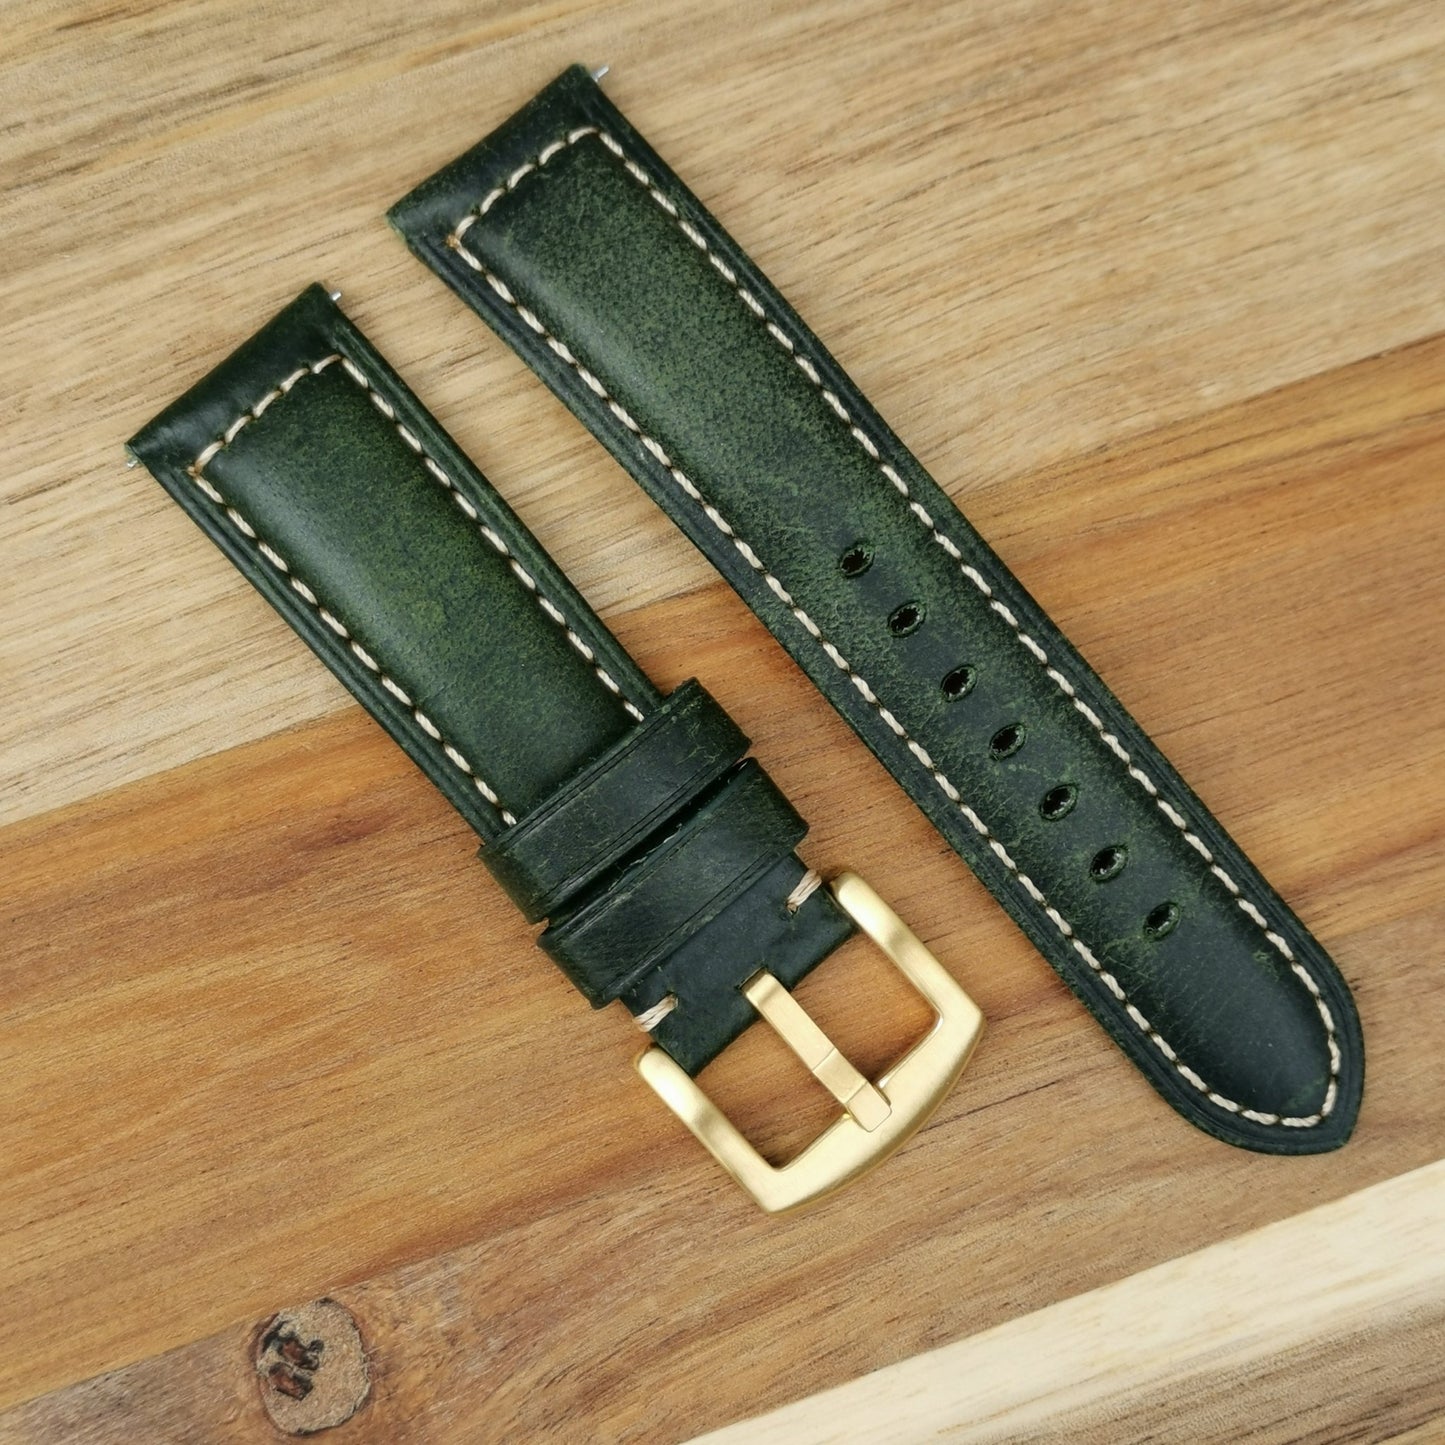 Berlin green full grain leather watch strap. Padded watch strap with a gold buckle and contrast ivory stitching.